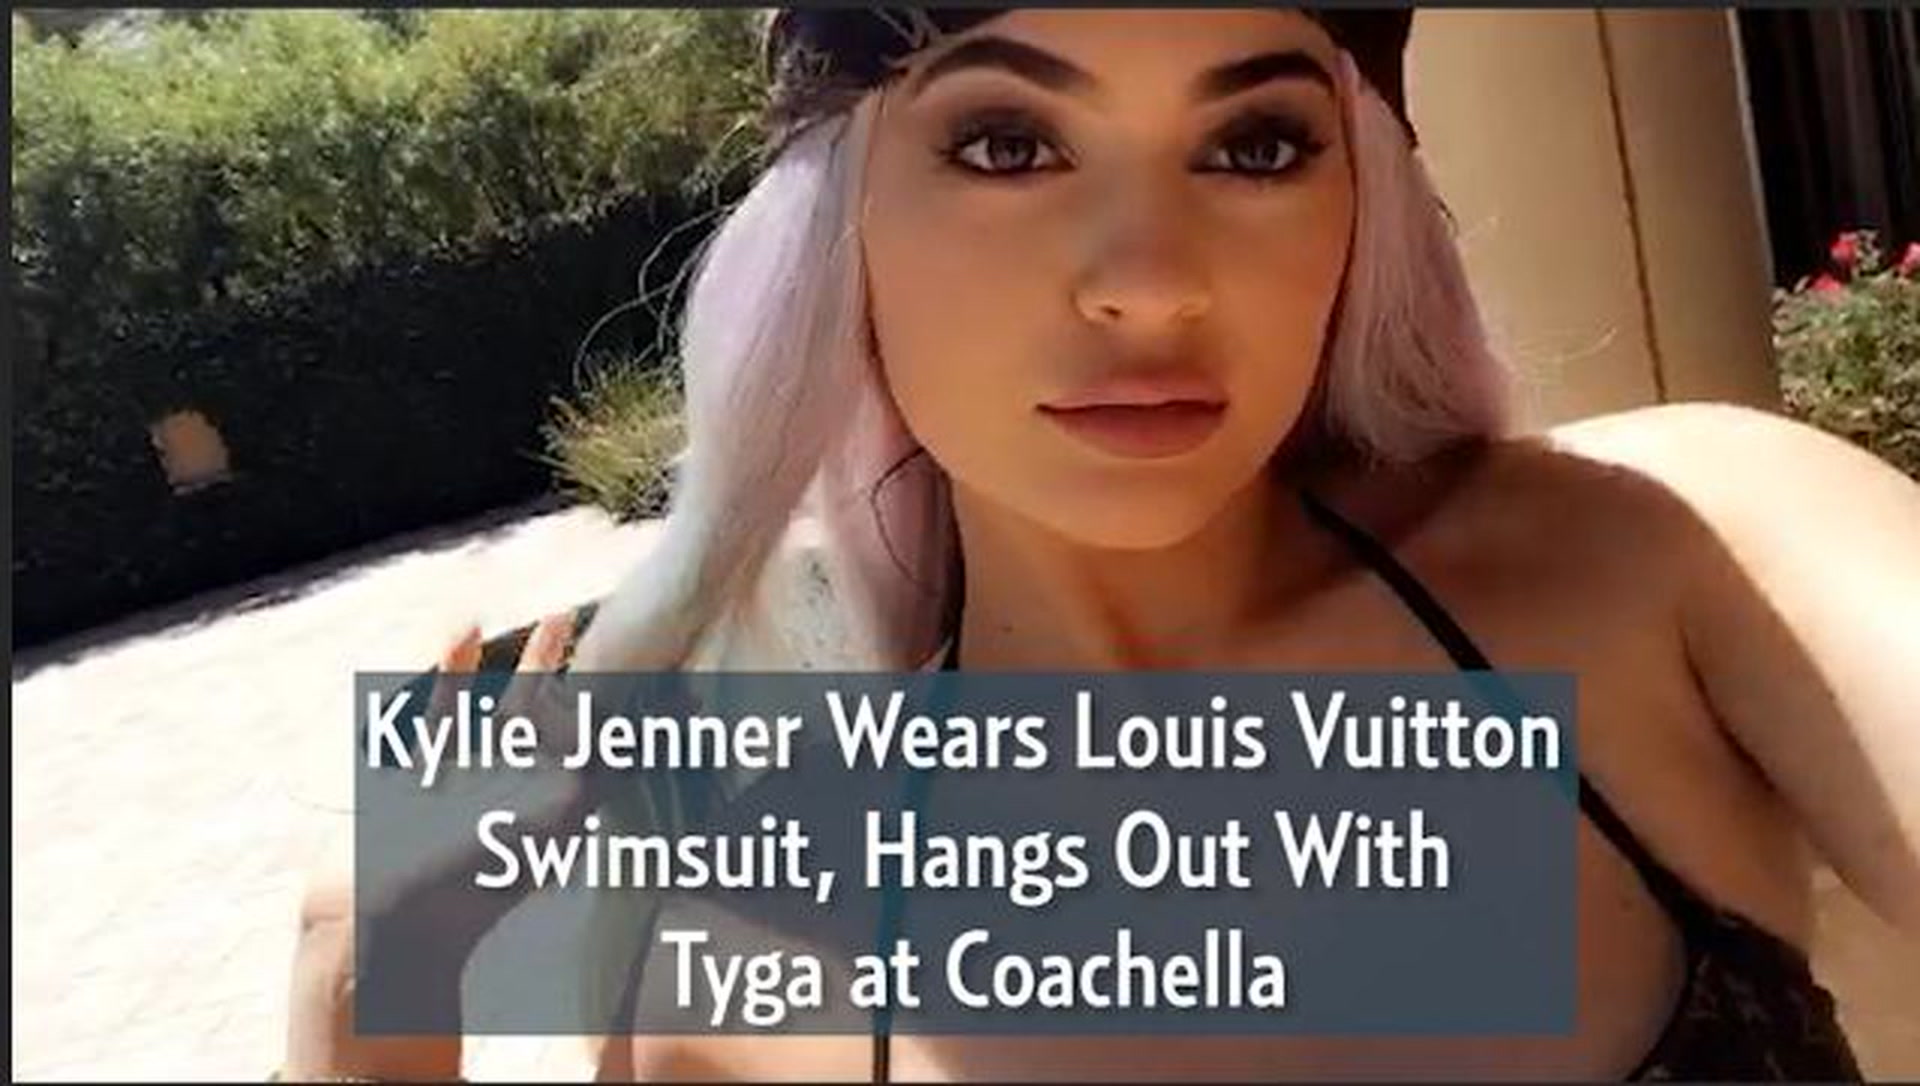 Kylie Jenner Wears Louis Vuitton Swimsuit, Hangs Out With Tyga